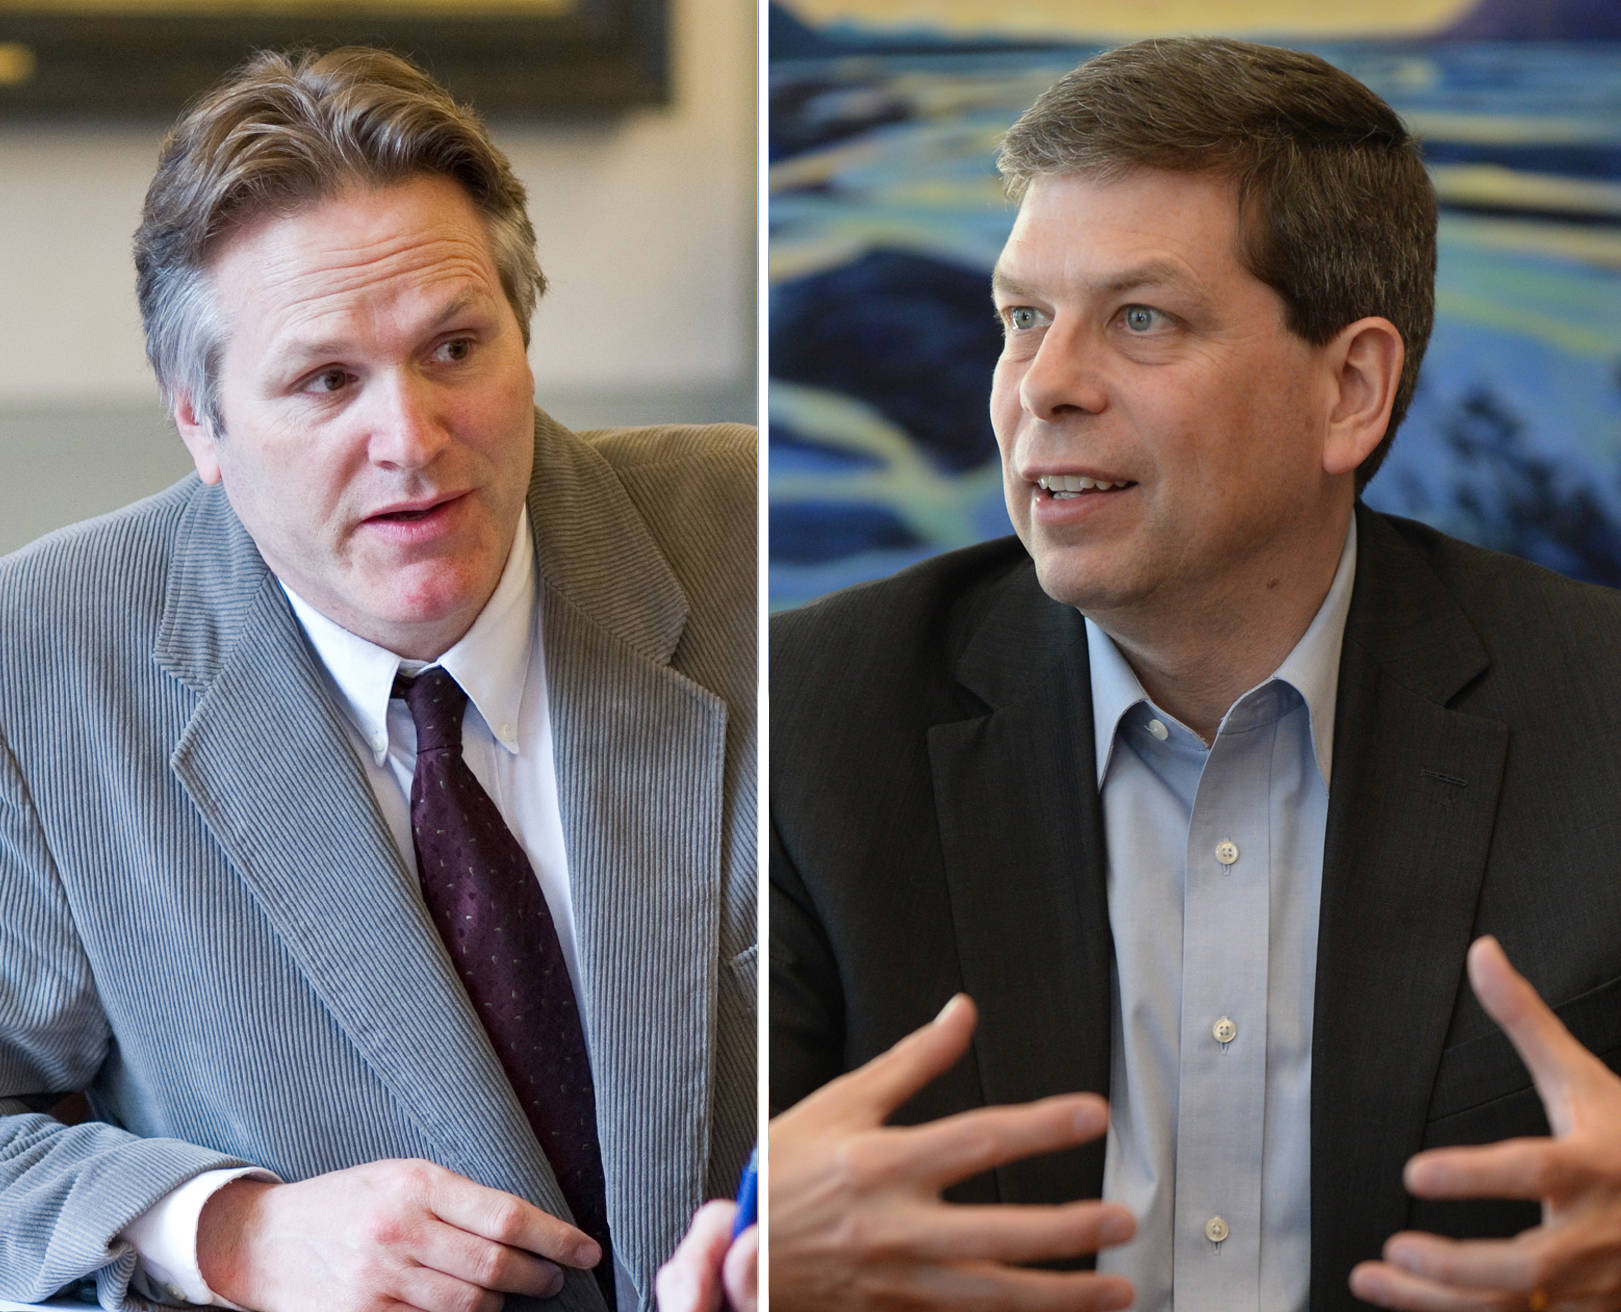 Republican governor candidate Mike Dunleavy, left, and Democratic governor candidate Mark Begich, right, faced each other in their first head-to-head debate just 90 minutes after incumbent independent Gov. Bill Walker announced he was suspending his campaign. (Composite image)                                Republican governor candidate Mike Dunleavy, left, and Democratic governor candidate Mark Begich, right, faced each other in their first head-to-head debate just 90 minutes after incumbent independent Gov. Bill Walker announced he was suspending his campaign. (Composite image)